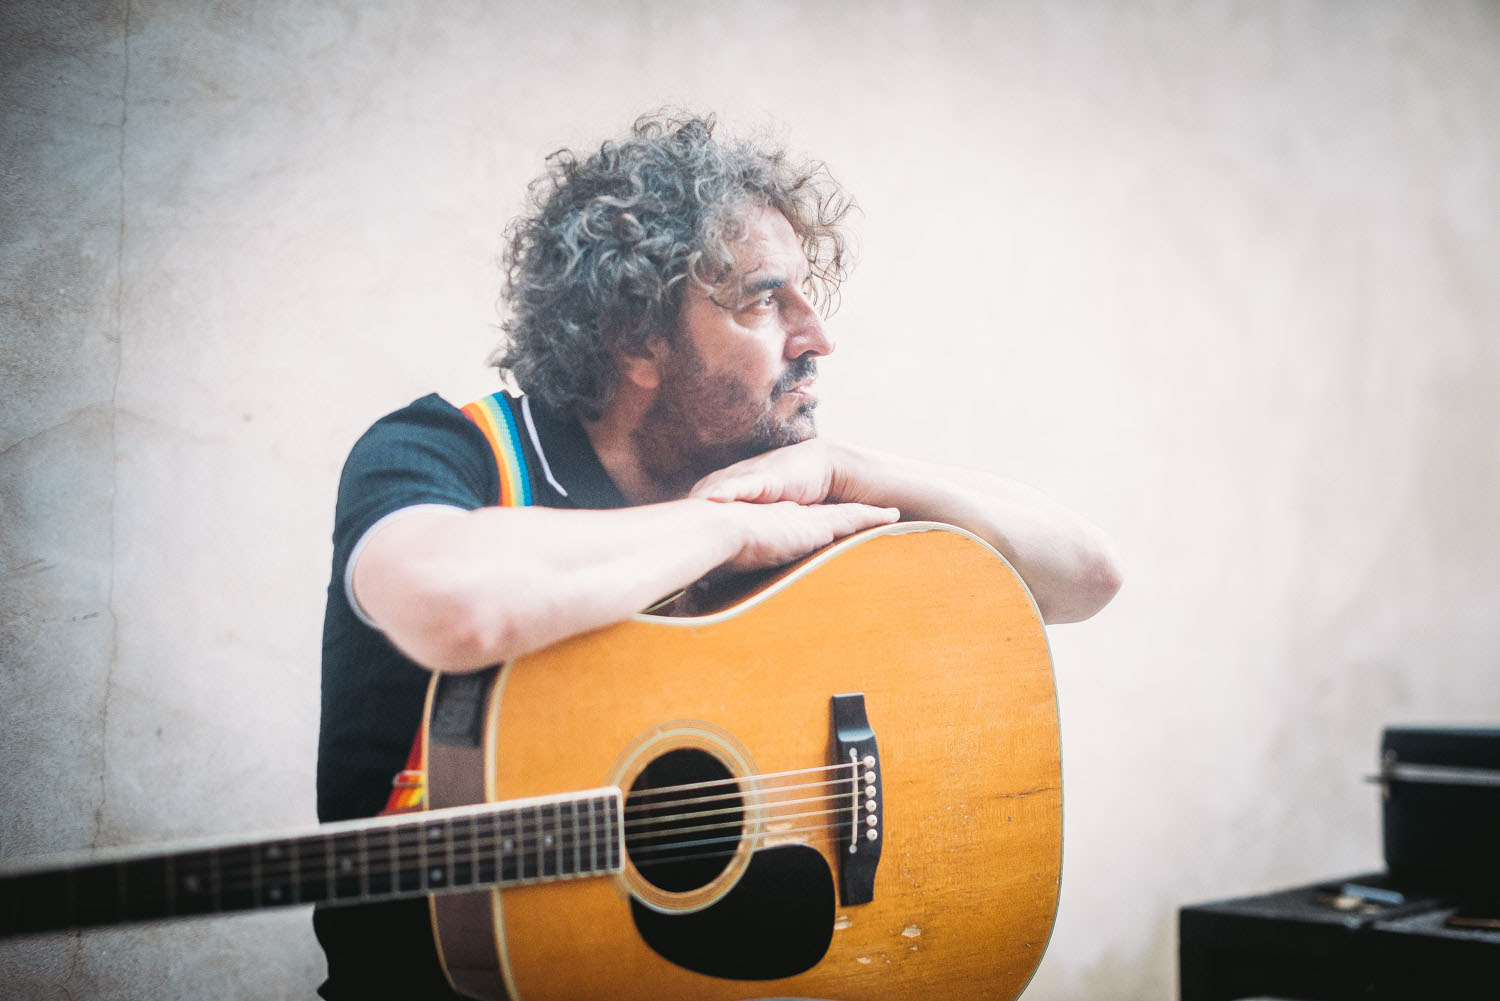 PREMIERE: Ian Prowse releases 'Home' video in support of CALM 